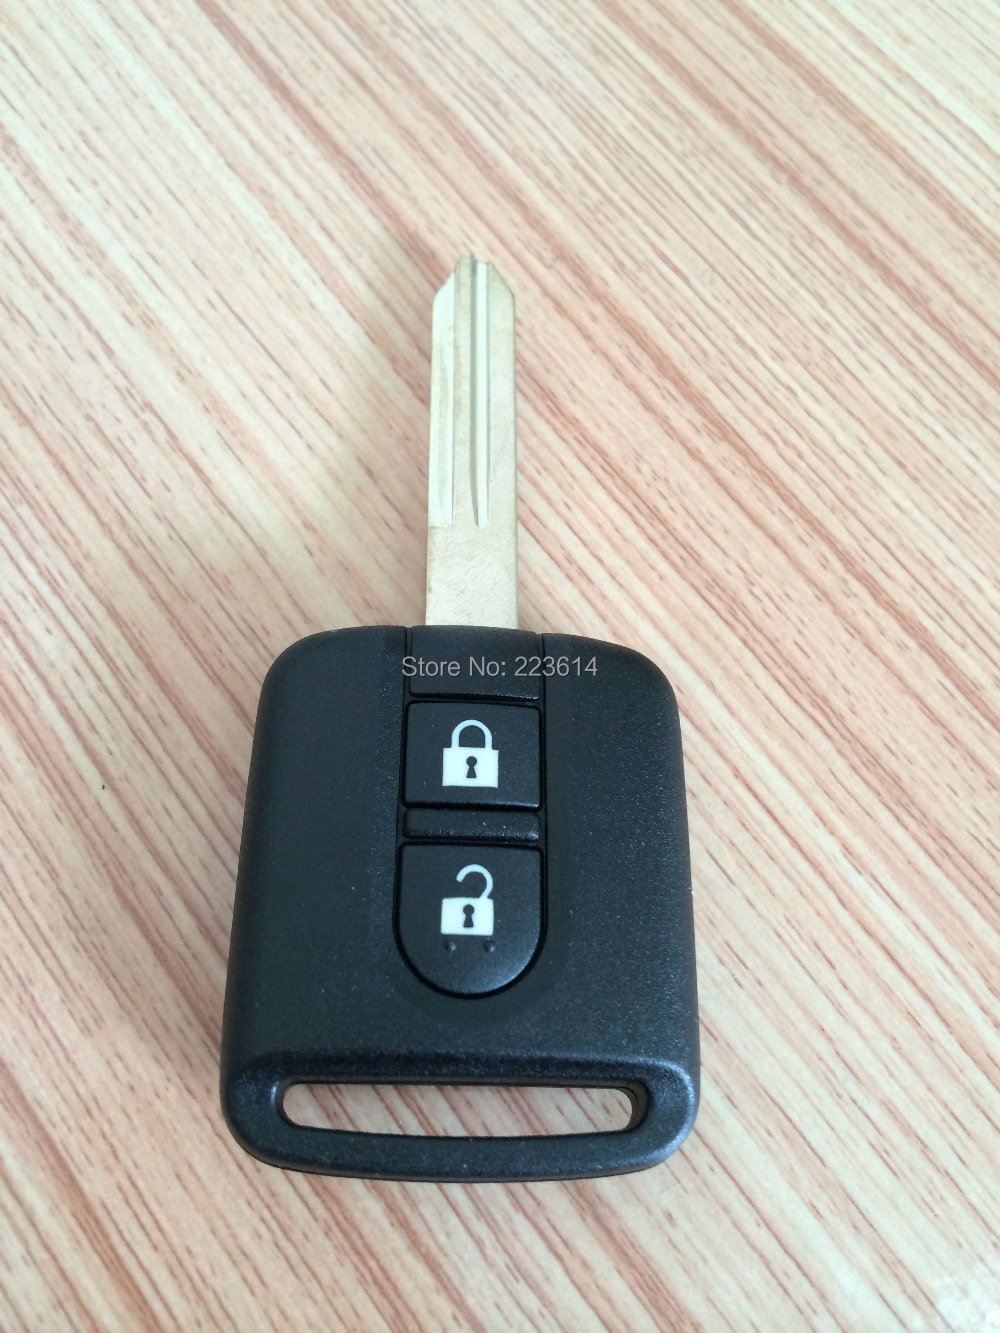 Black 2 Button Remote Key For Nissan Pickup Duke 433MHZ With ID46 Chip Inside Excellent Quality